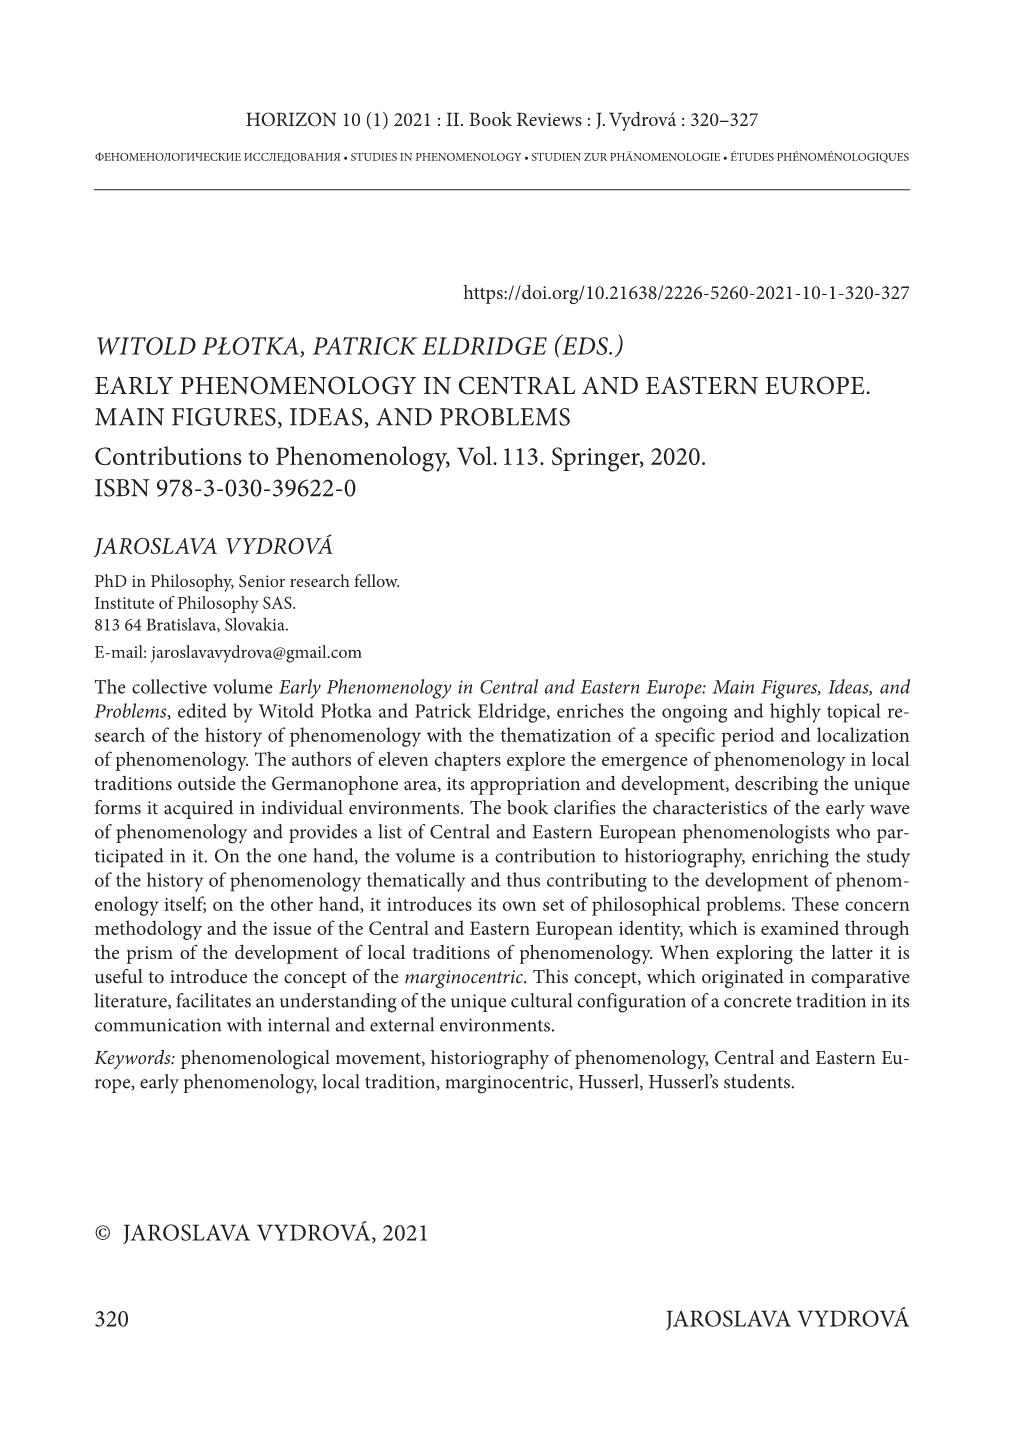 Witold Płotka, Patrick Eldridge (Eds.) Early Phenomenology in Central and Eastern Europe